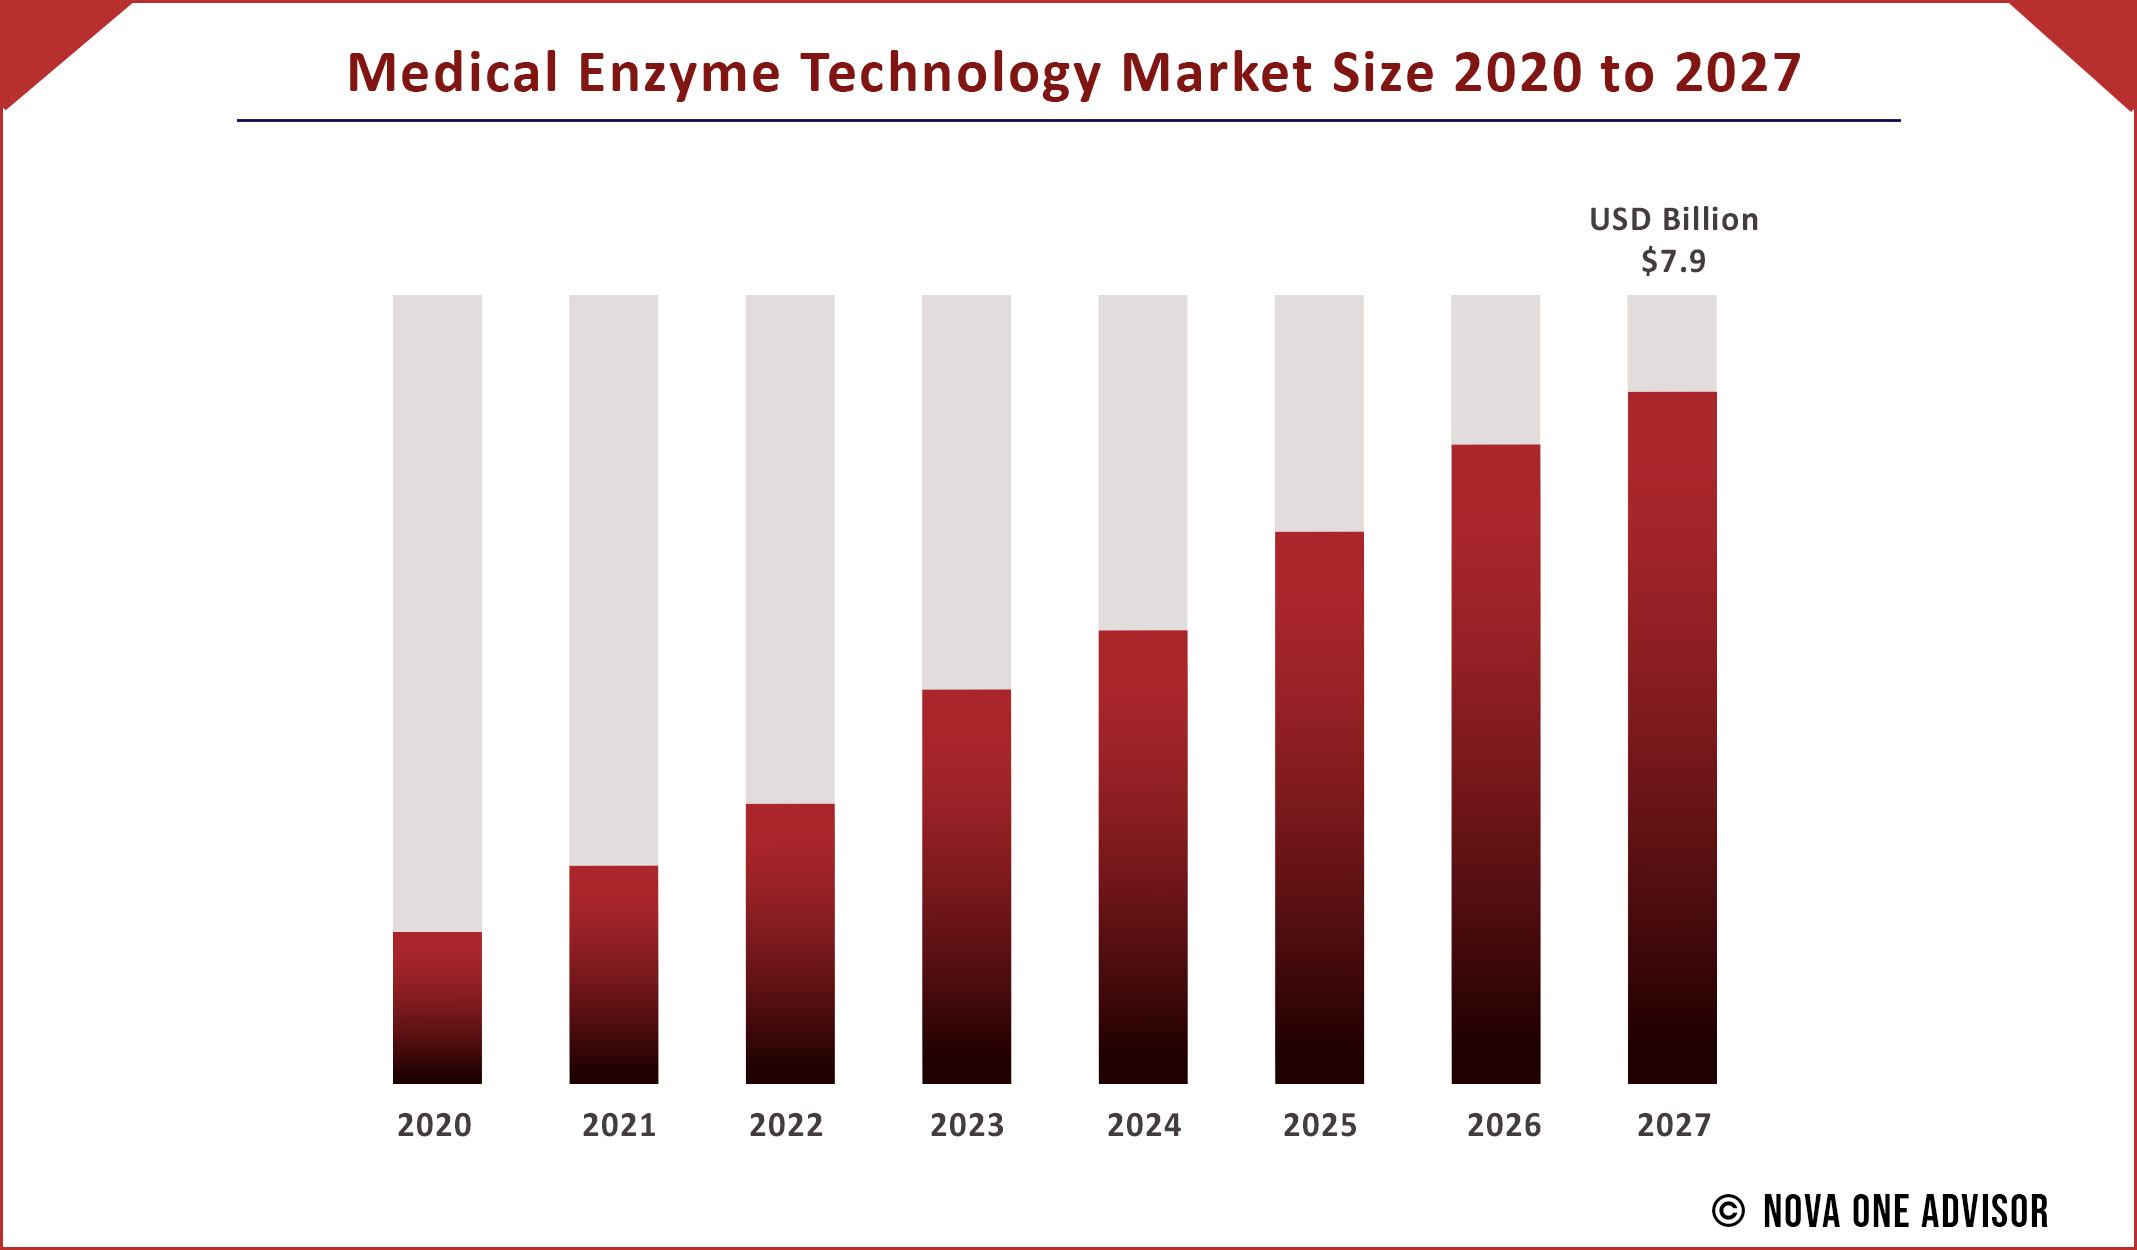 Medical Enzyme Technology Market Size 2020 to 2027